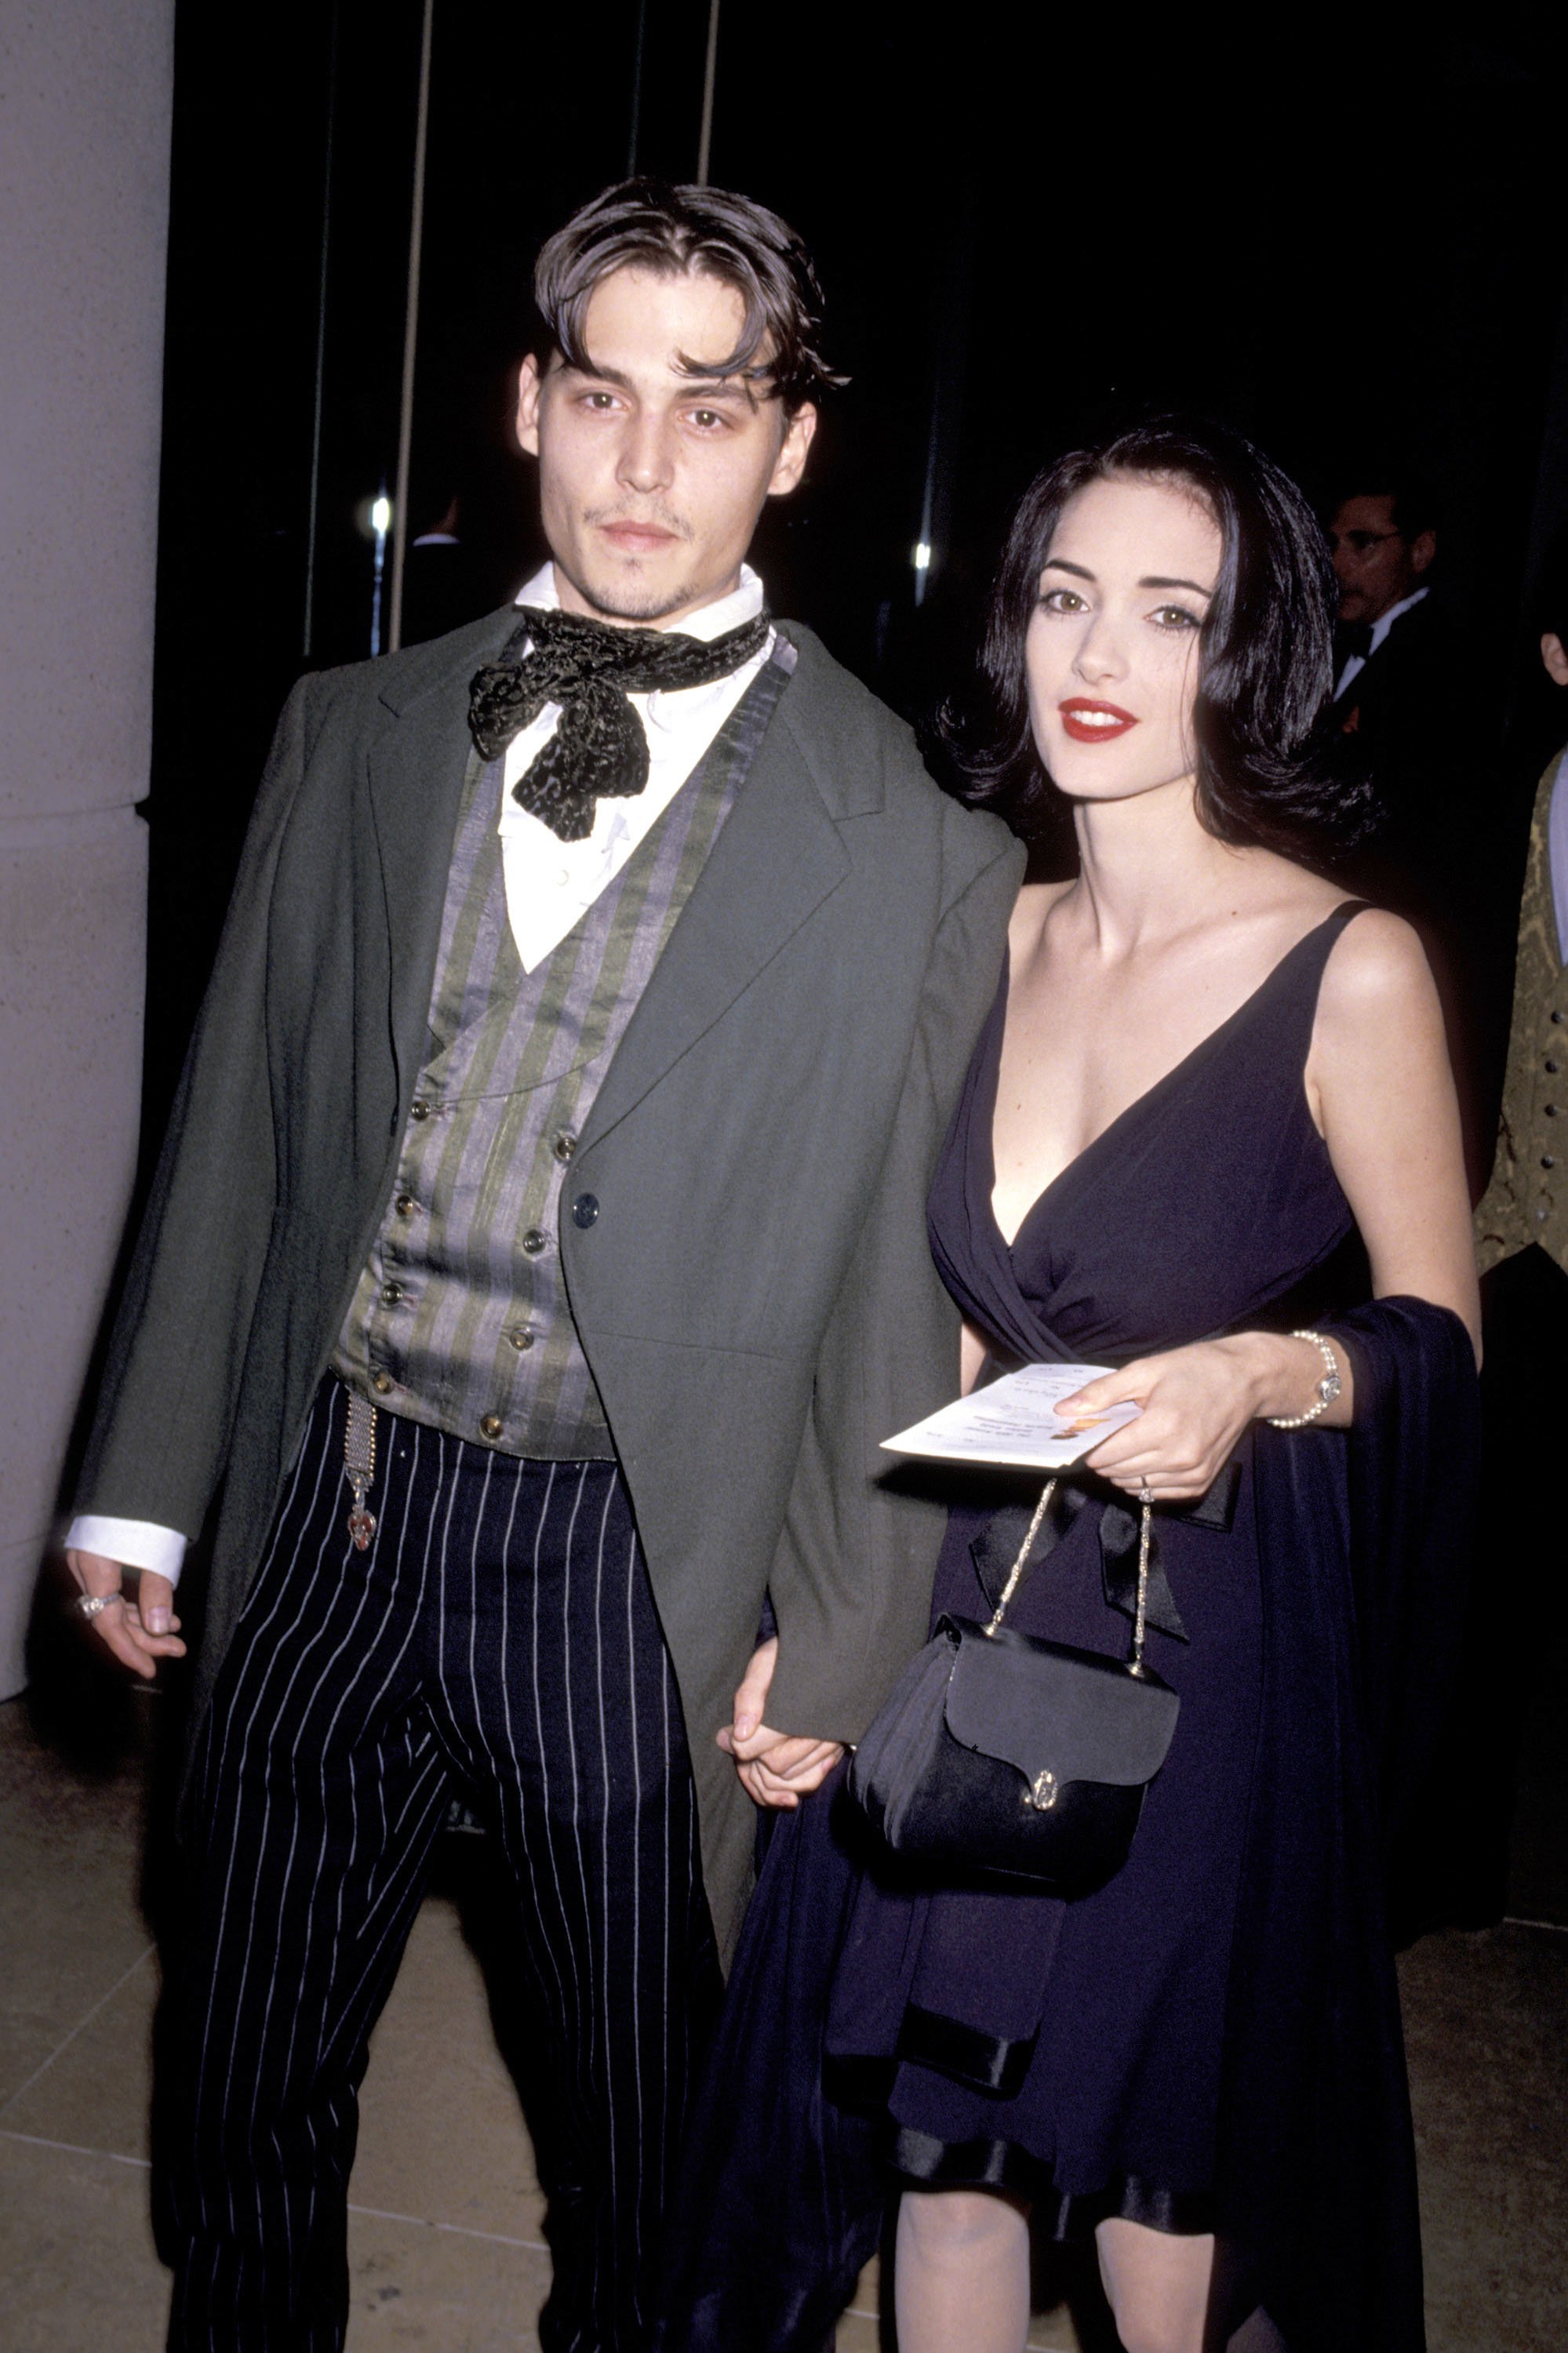 Johnny Depp and Winona Ryder at the 48th Annual Golden Globe Awards on January 19, 1991. | Source: Jim Smeal/Ron Galella Collection/Getty Images